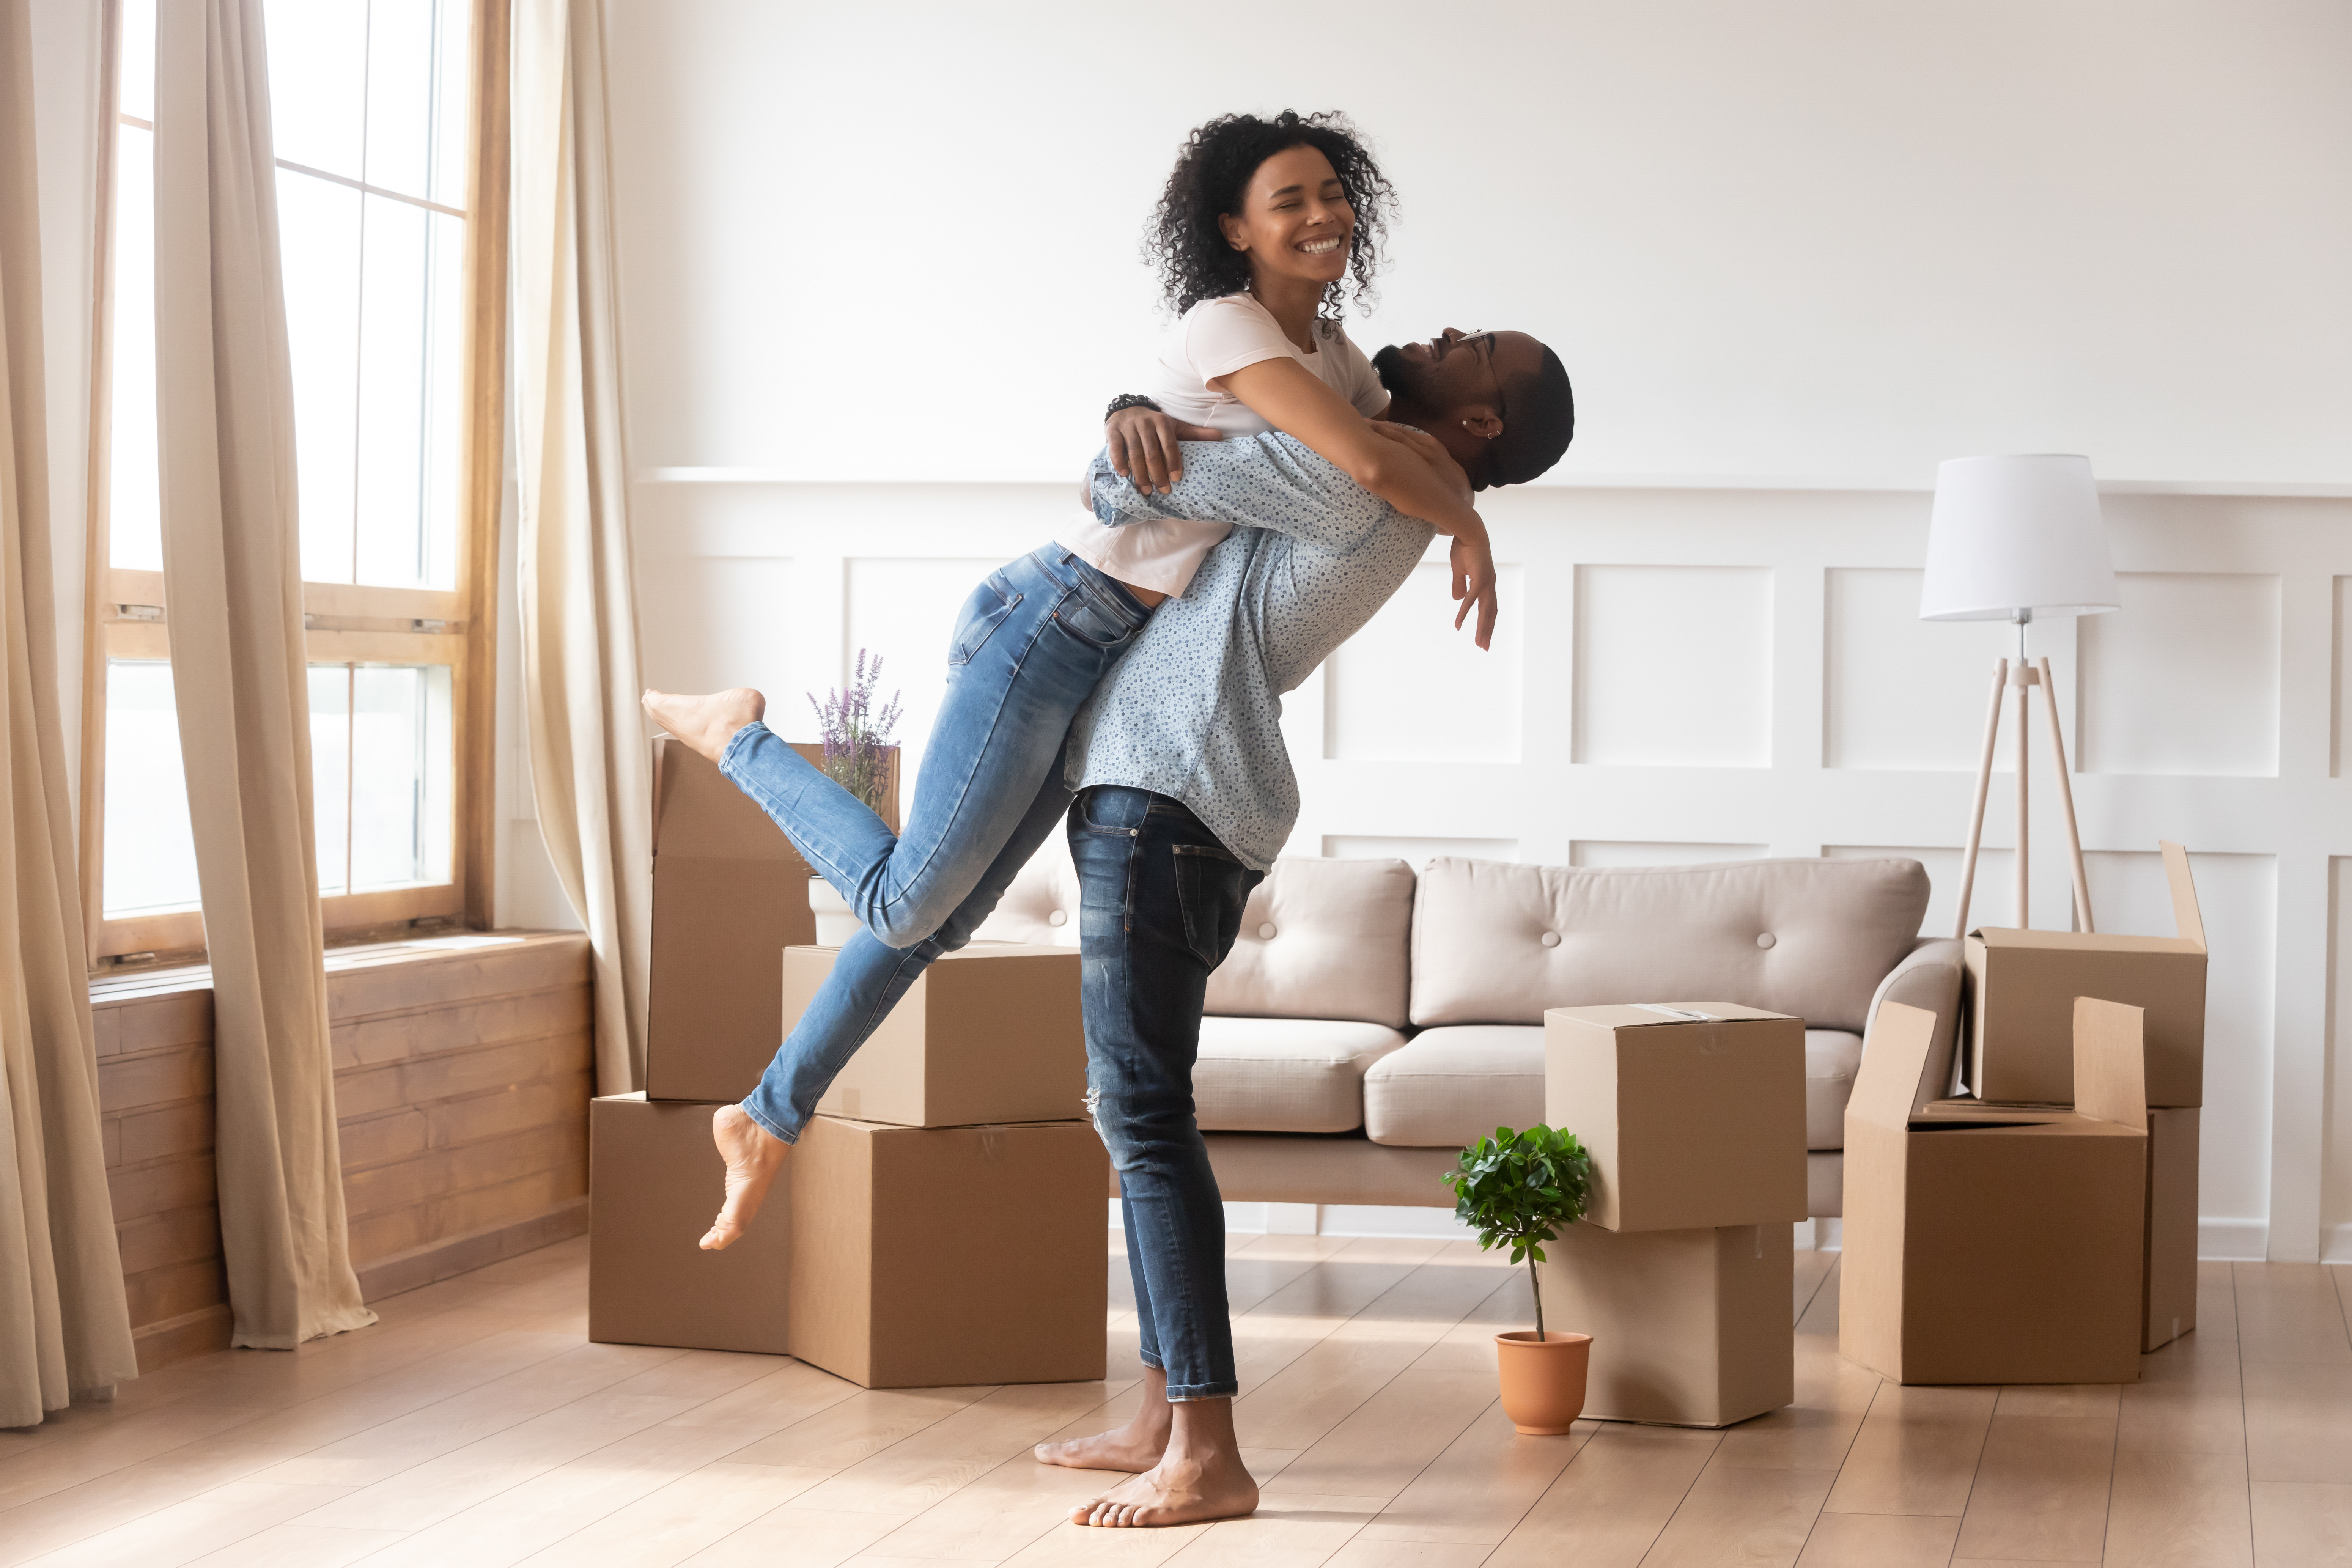 Happy african couple first time home buyers celebrate moving day